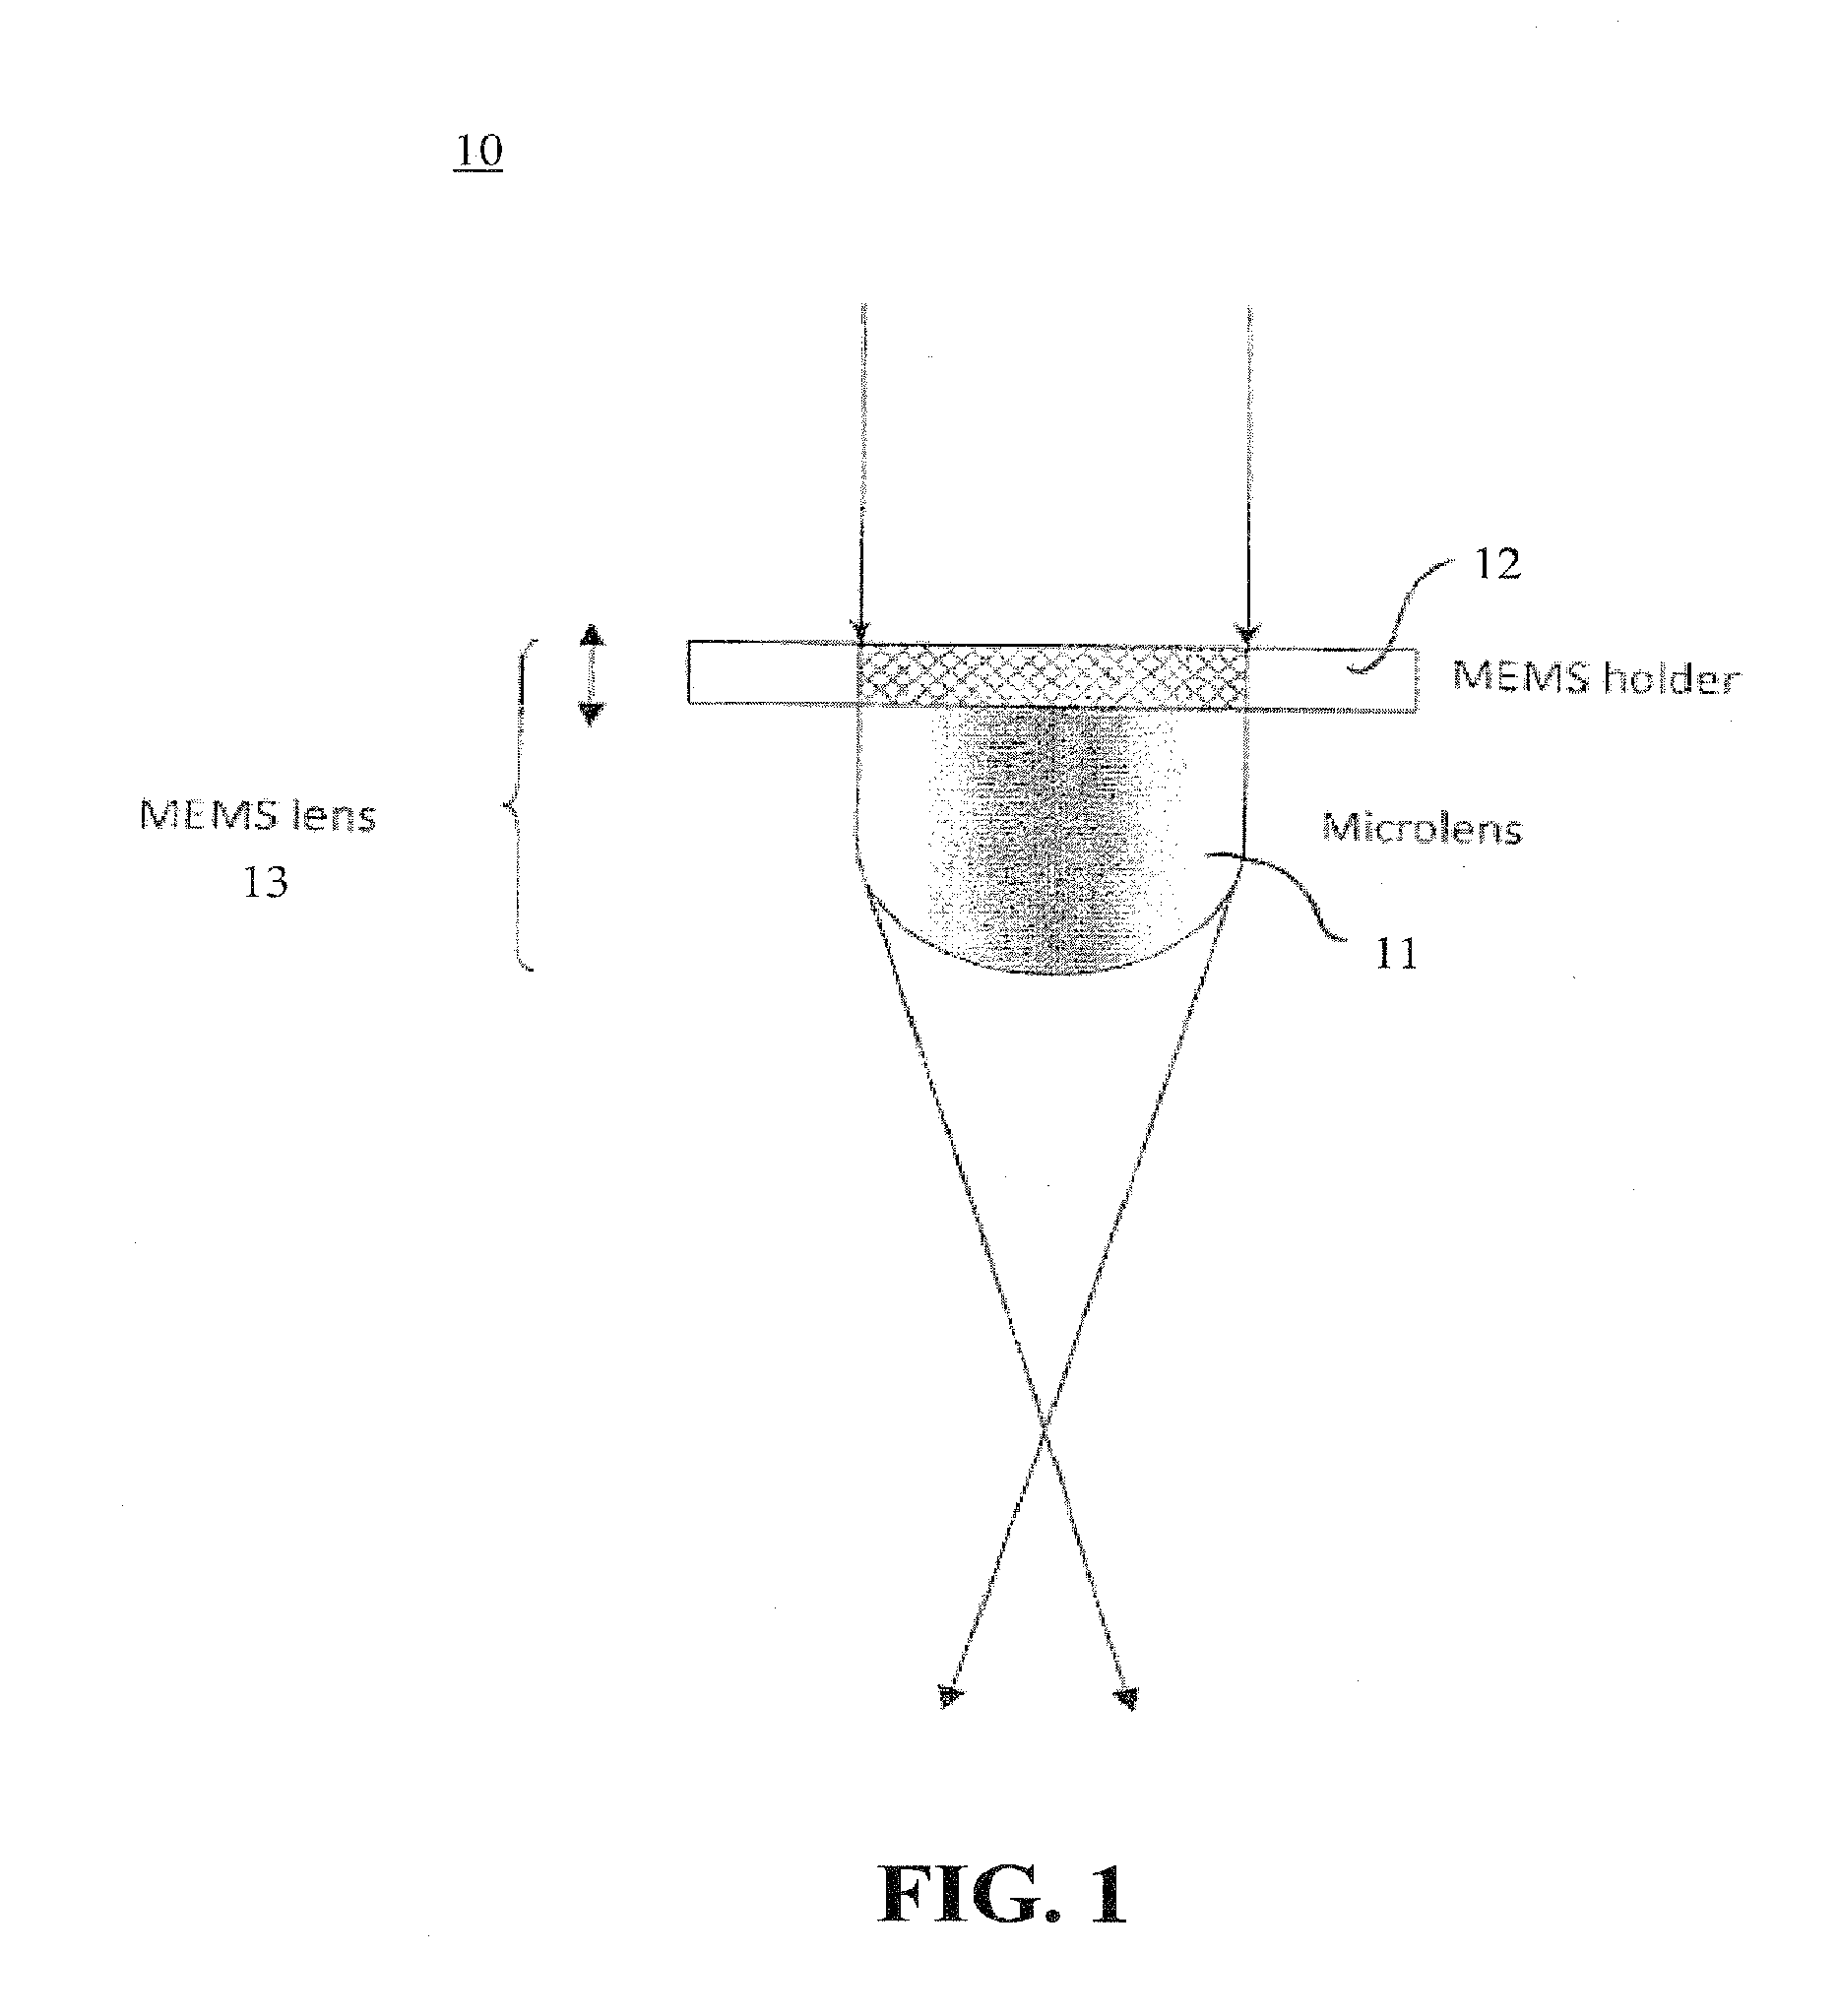 Mems-based optical image scanning apparatus, methods, and systems